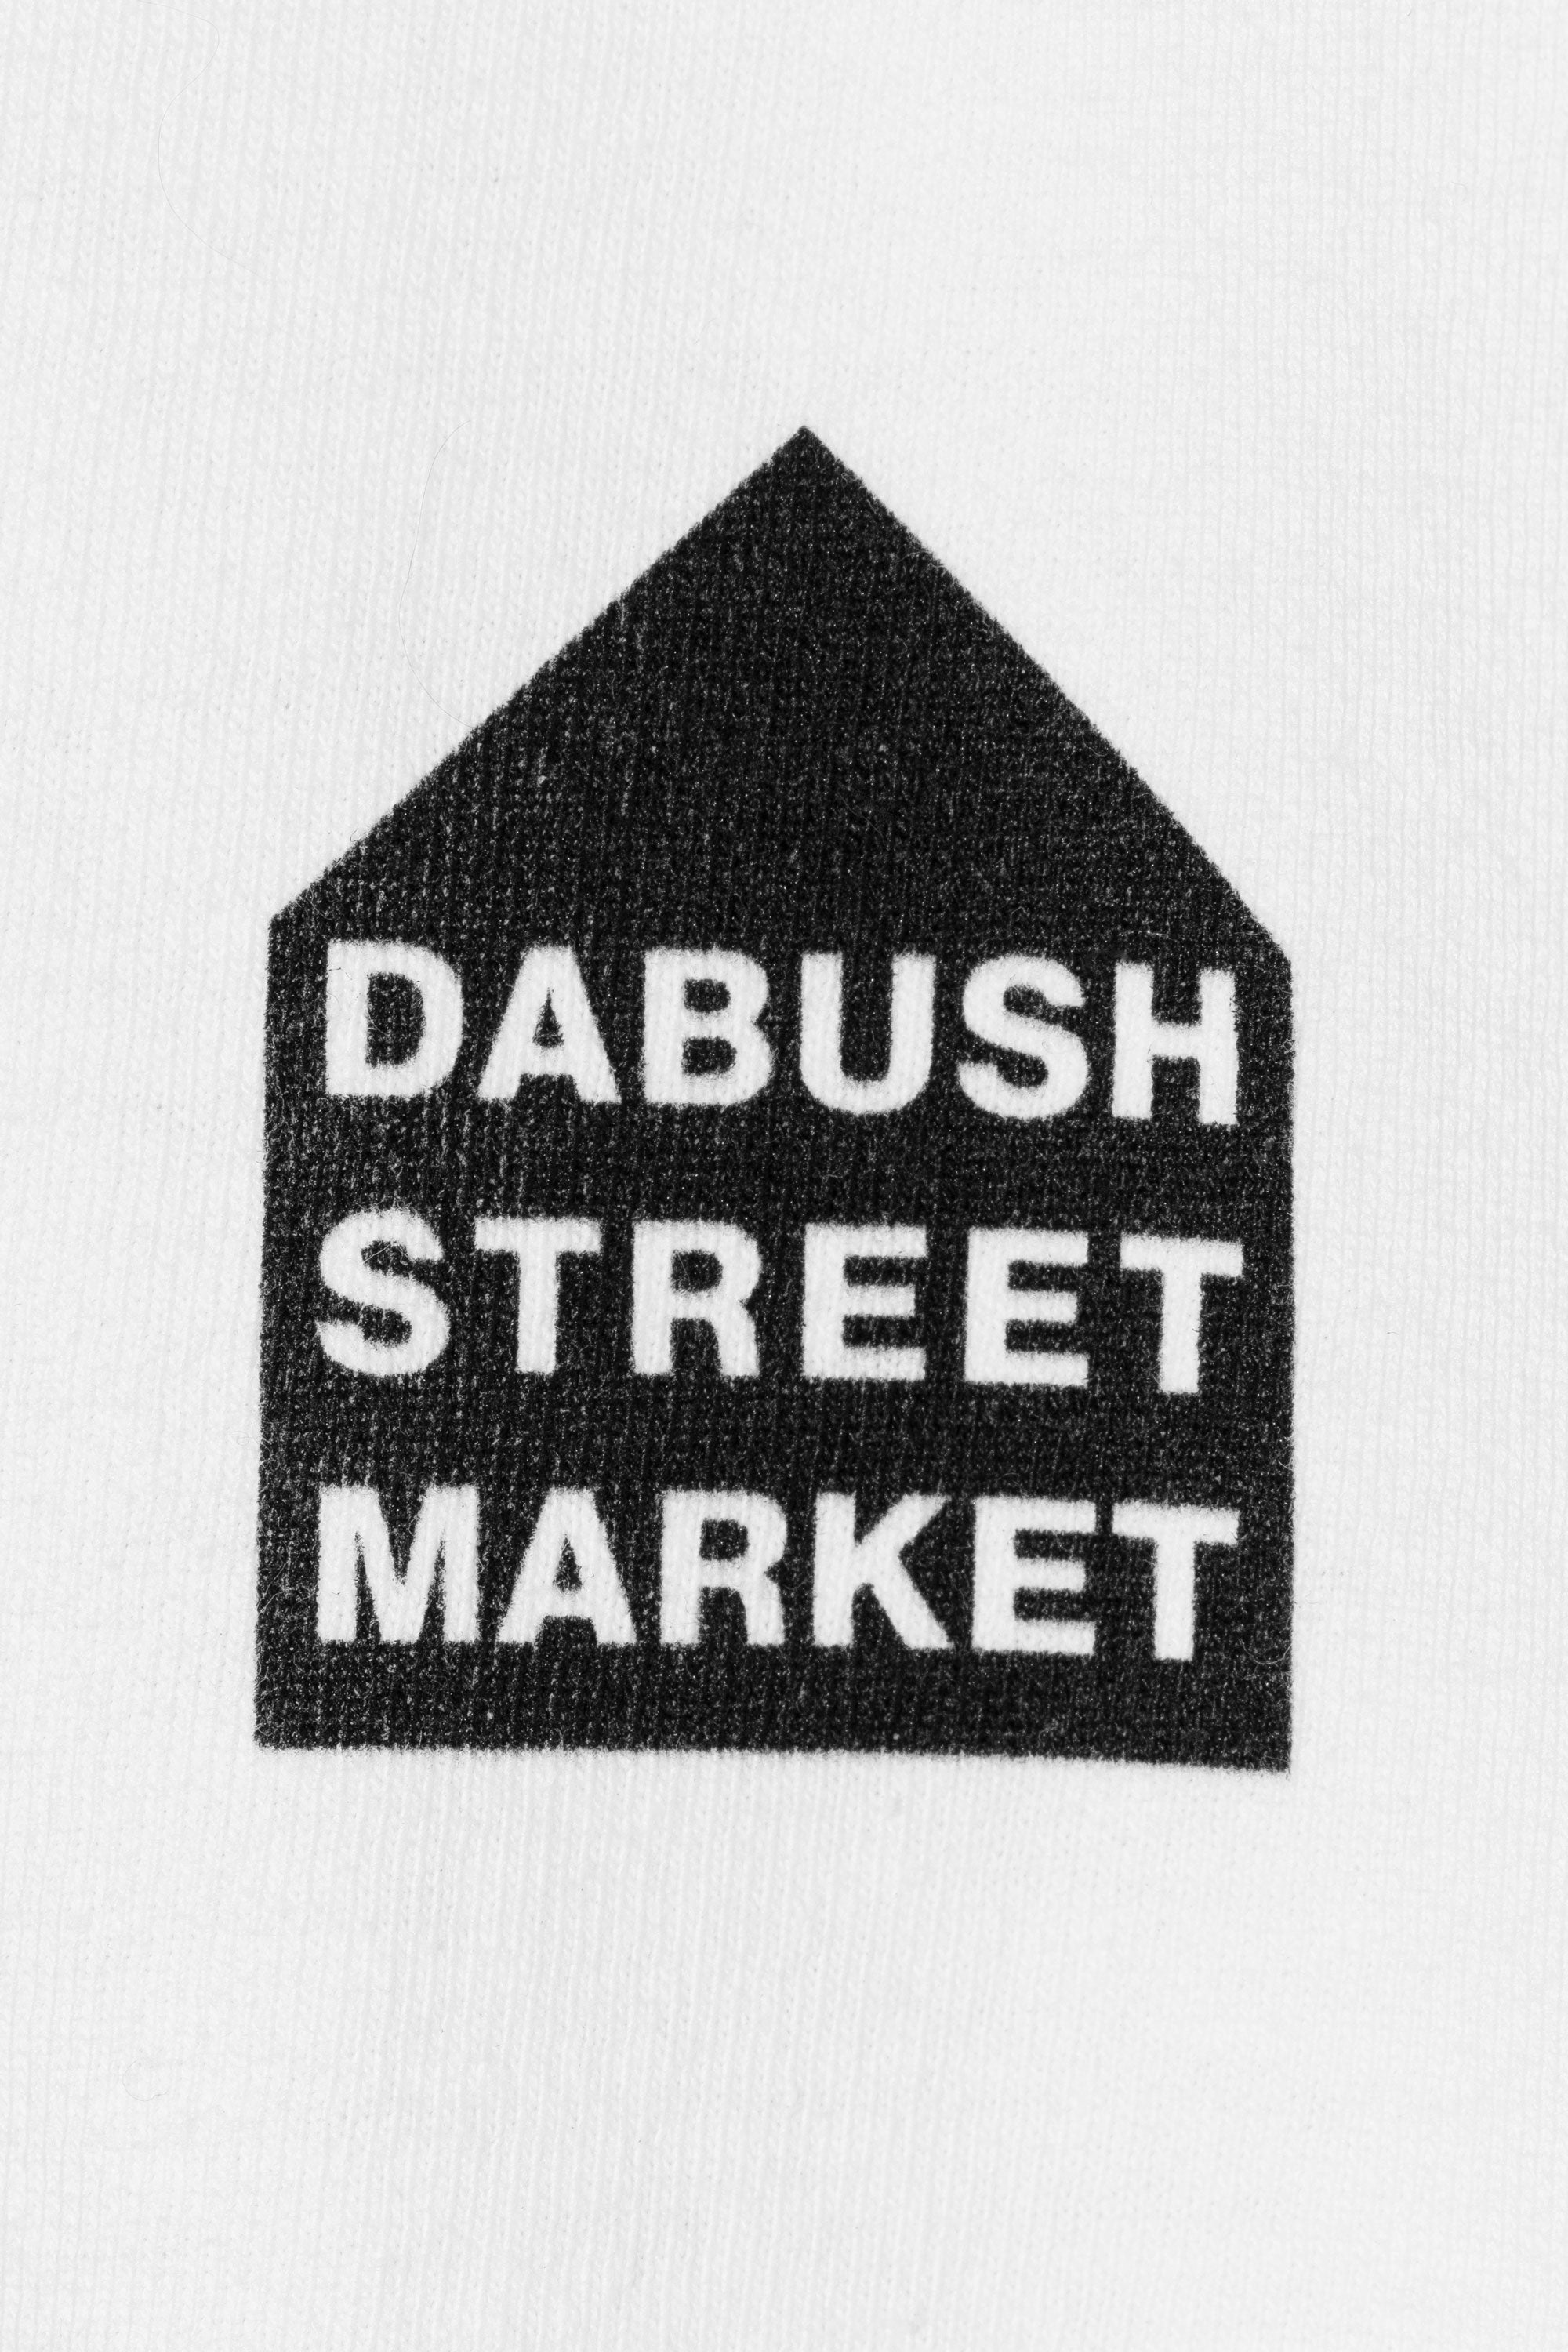 DABUSH STREET MARKET T-SHIRT. 100% Cotton, oversized tee with Back and front print. Made in Tel aviv. Shop and view the latest Drops from the official DABUSH website. Worldwide Shipping. DABUSH is a publishing house, design studio and a brand based in Tel Aviv, Israel.